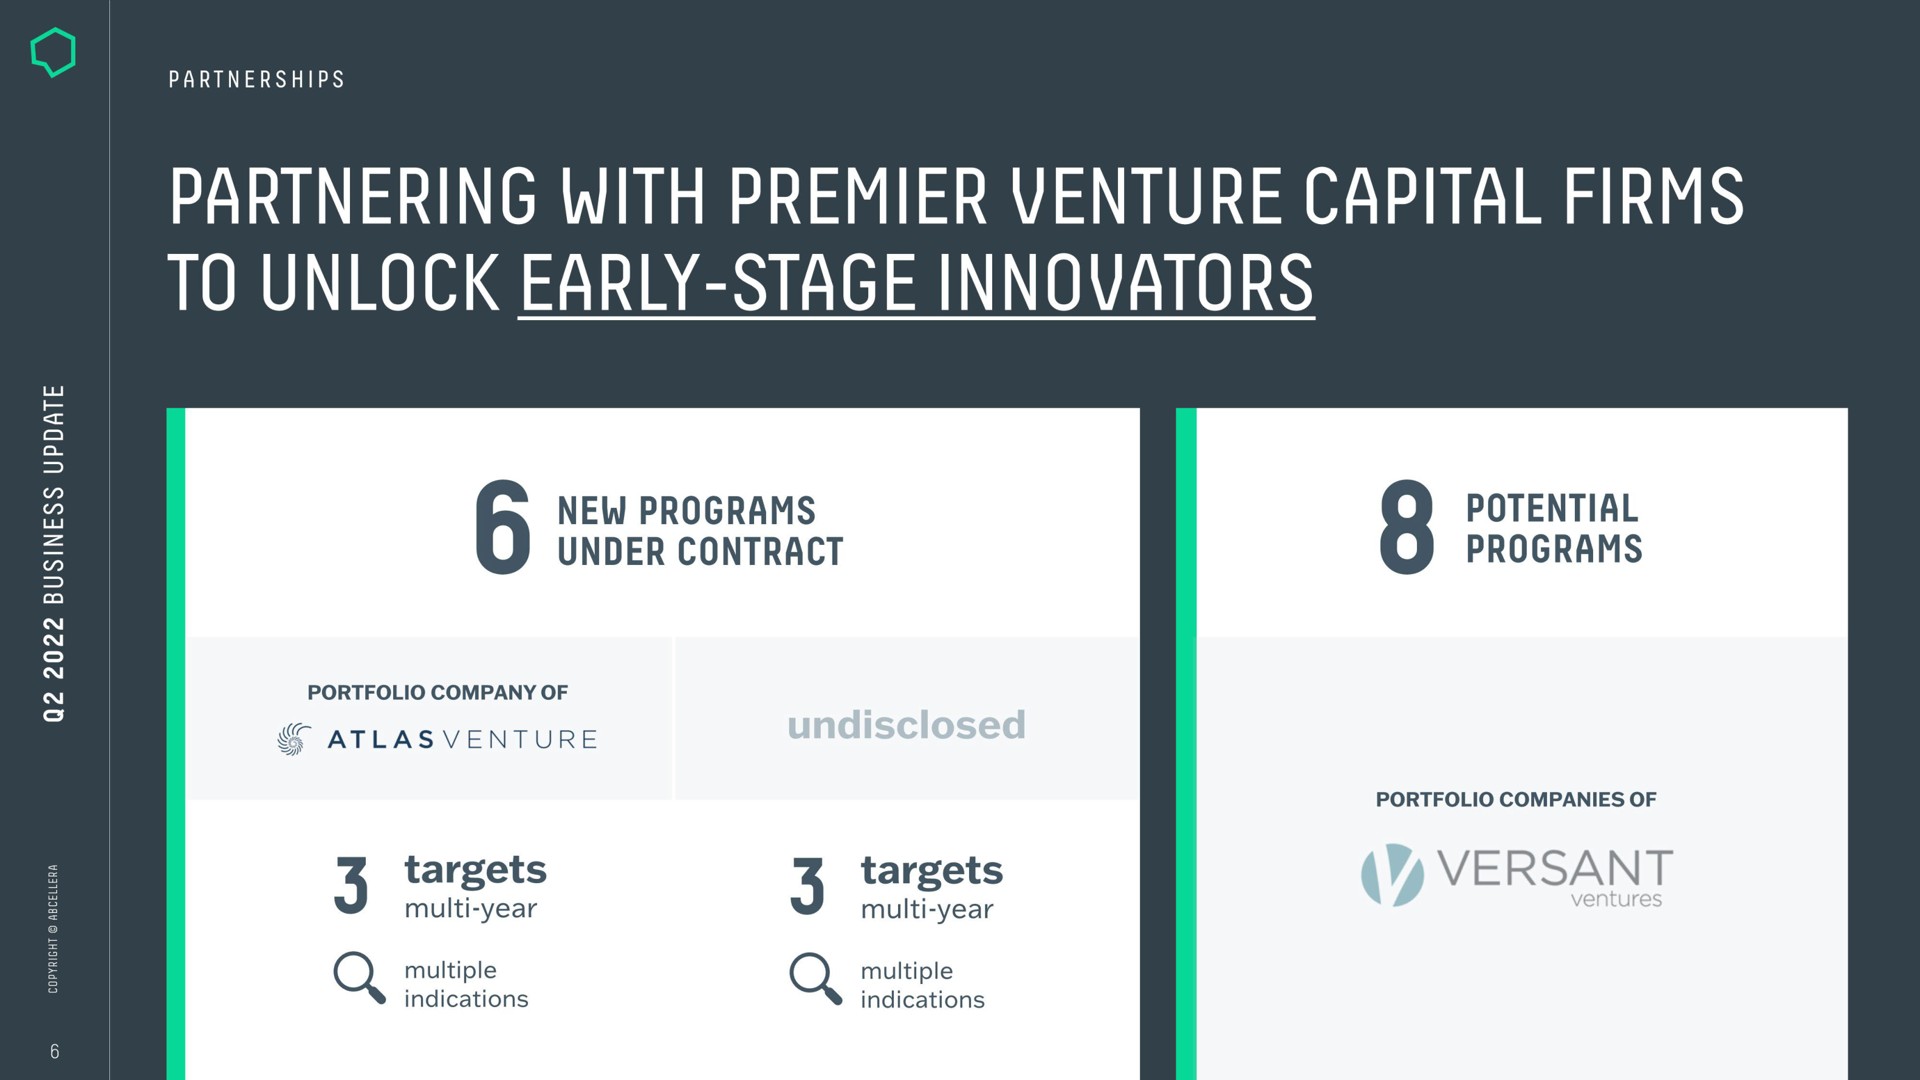 i a a mae mise to unlock early stage innovators potential programs new programs under contract targets targets versant | AbCellera